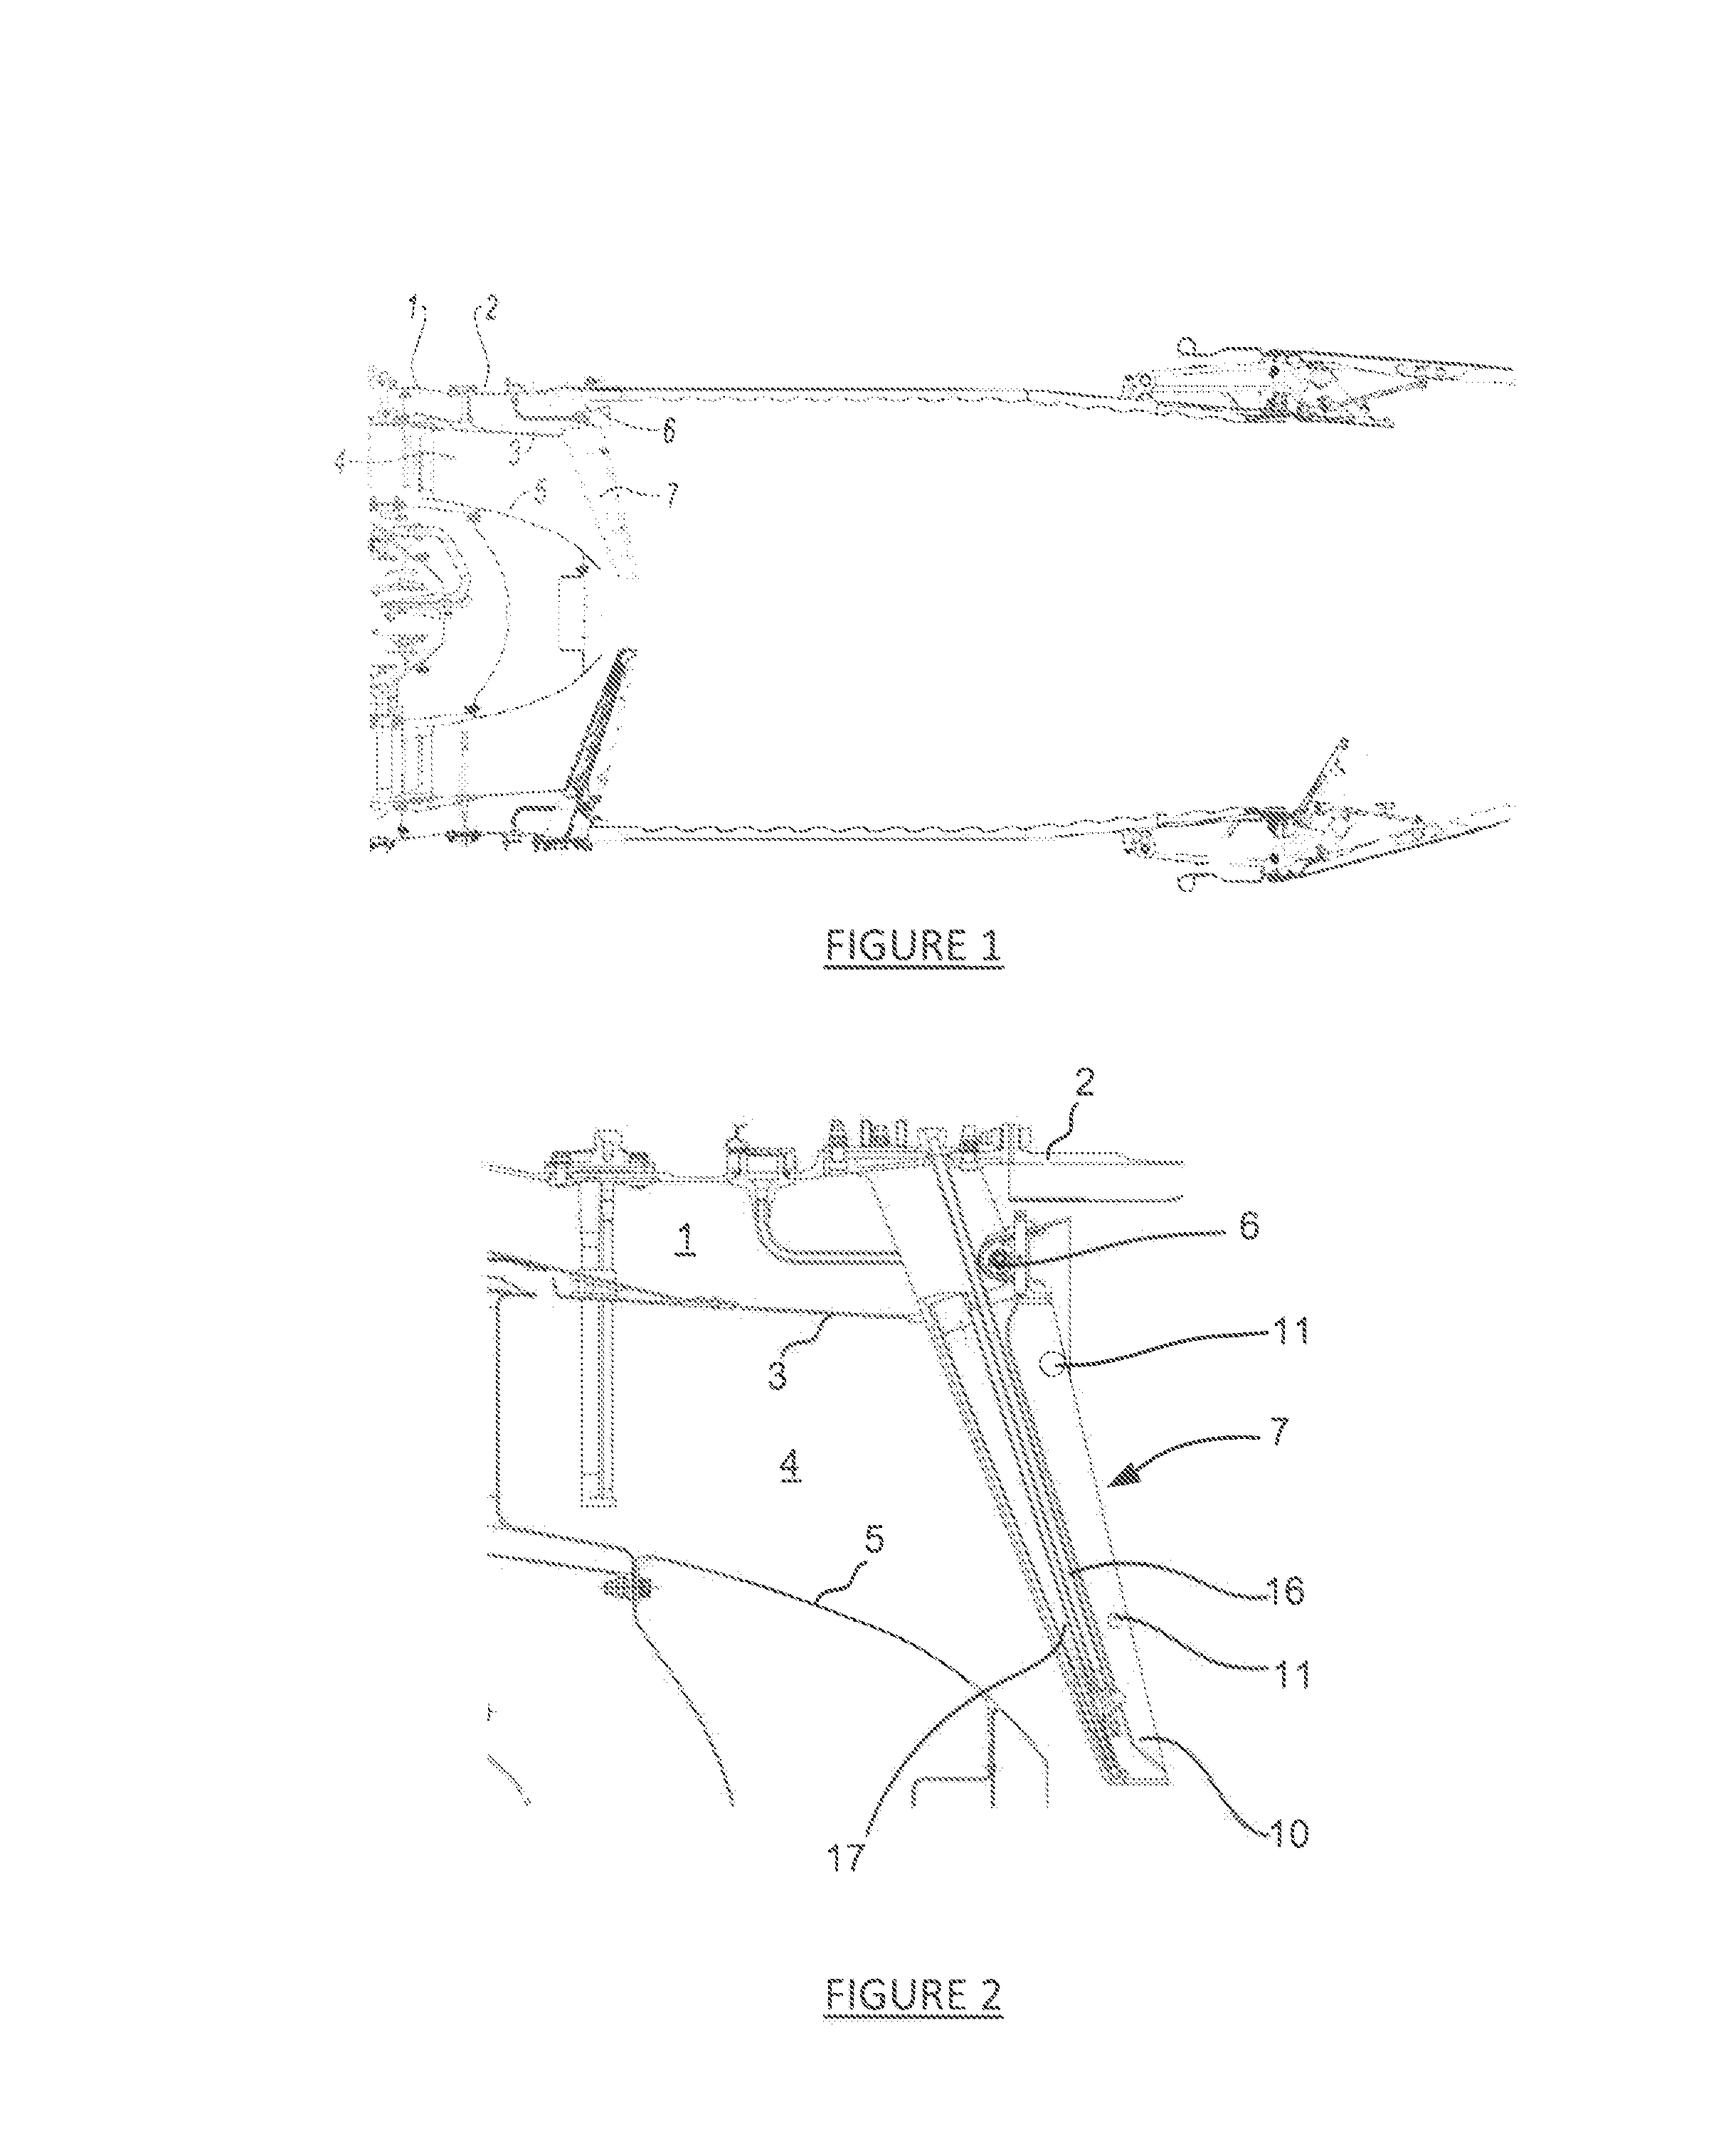 Flame-holder device comprising an arm support and a heat-protection screen that are in one piece